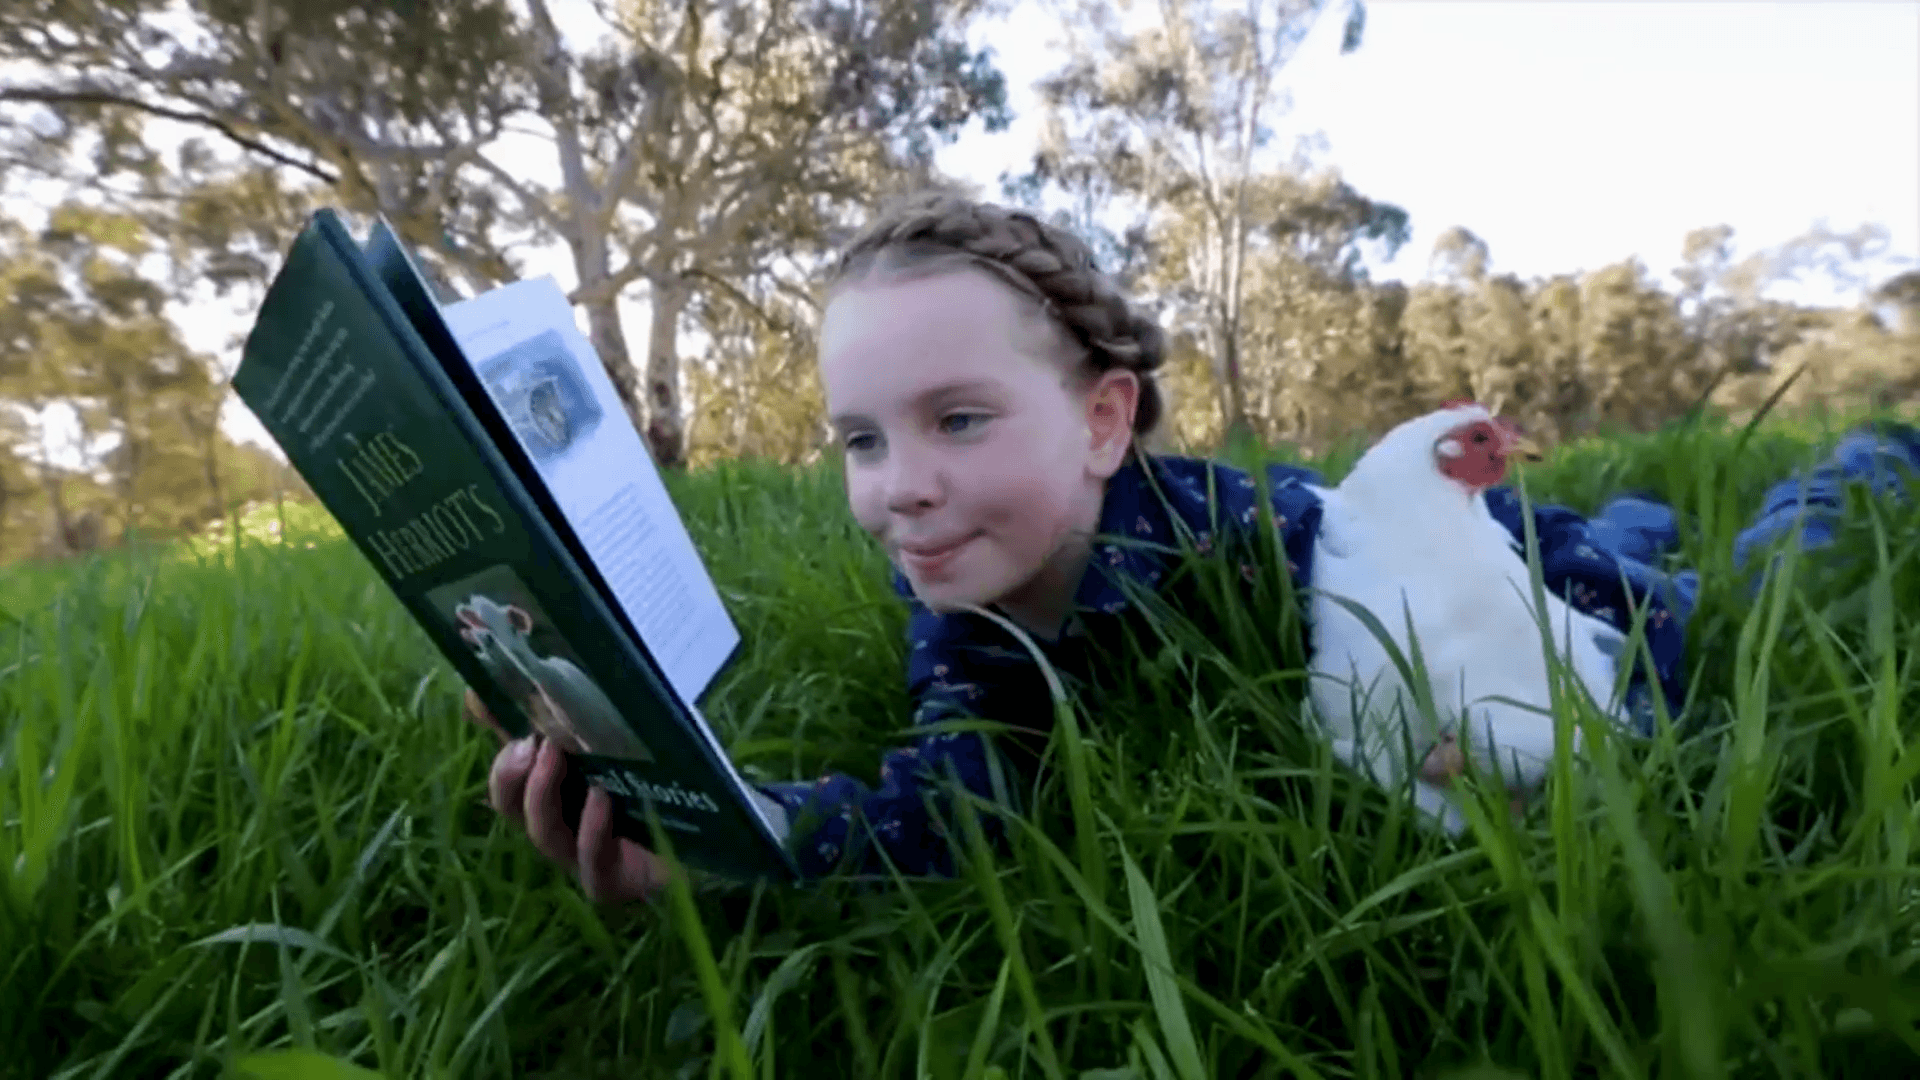 Distance education primary school student reading a book outside with her pet chicken